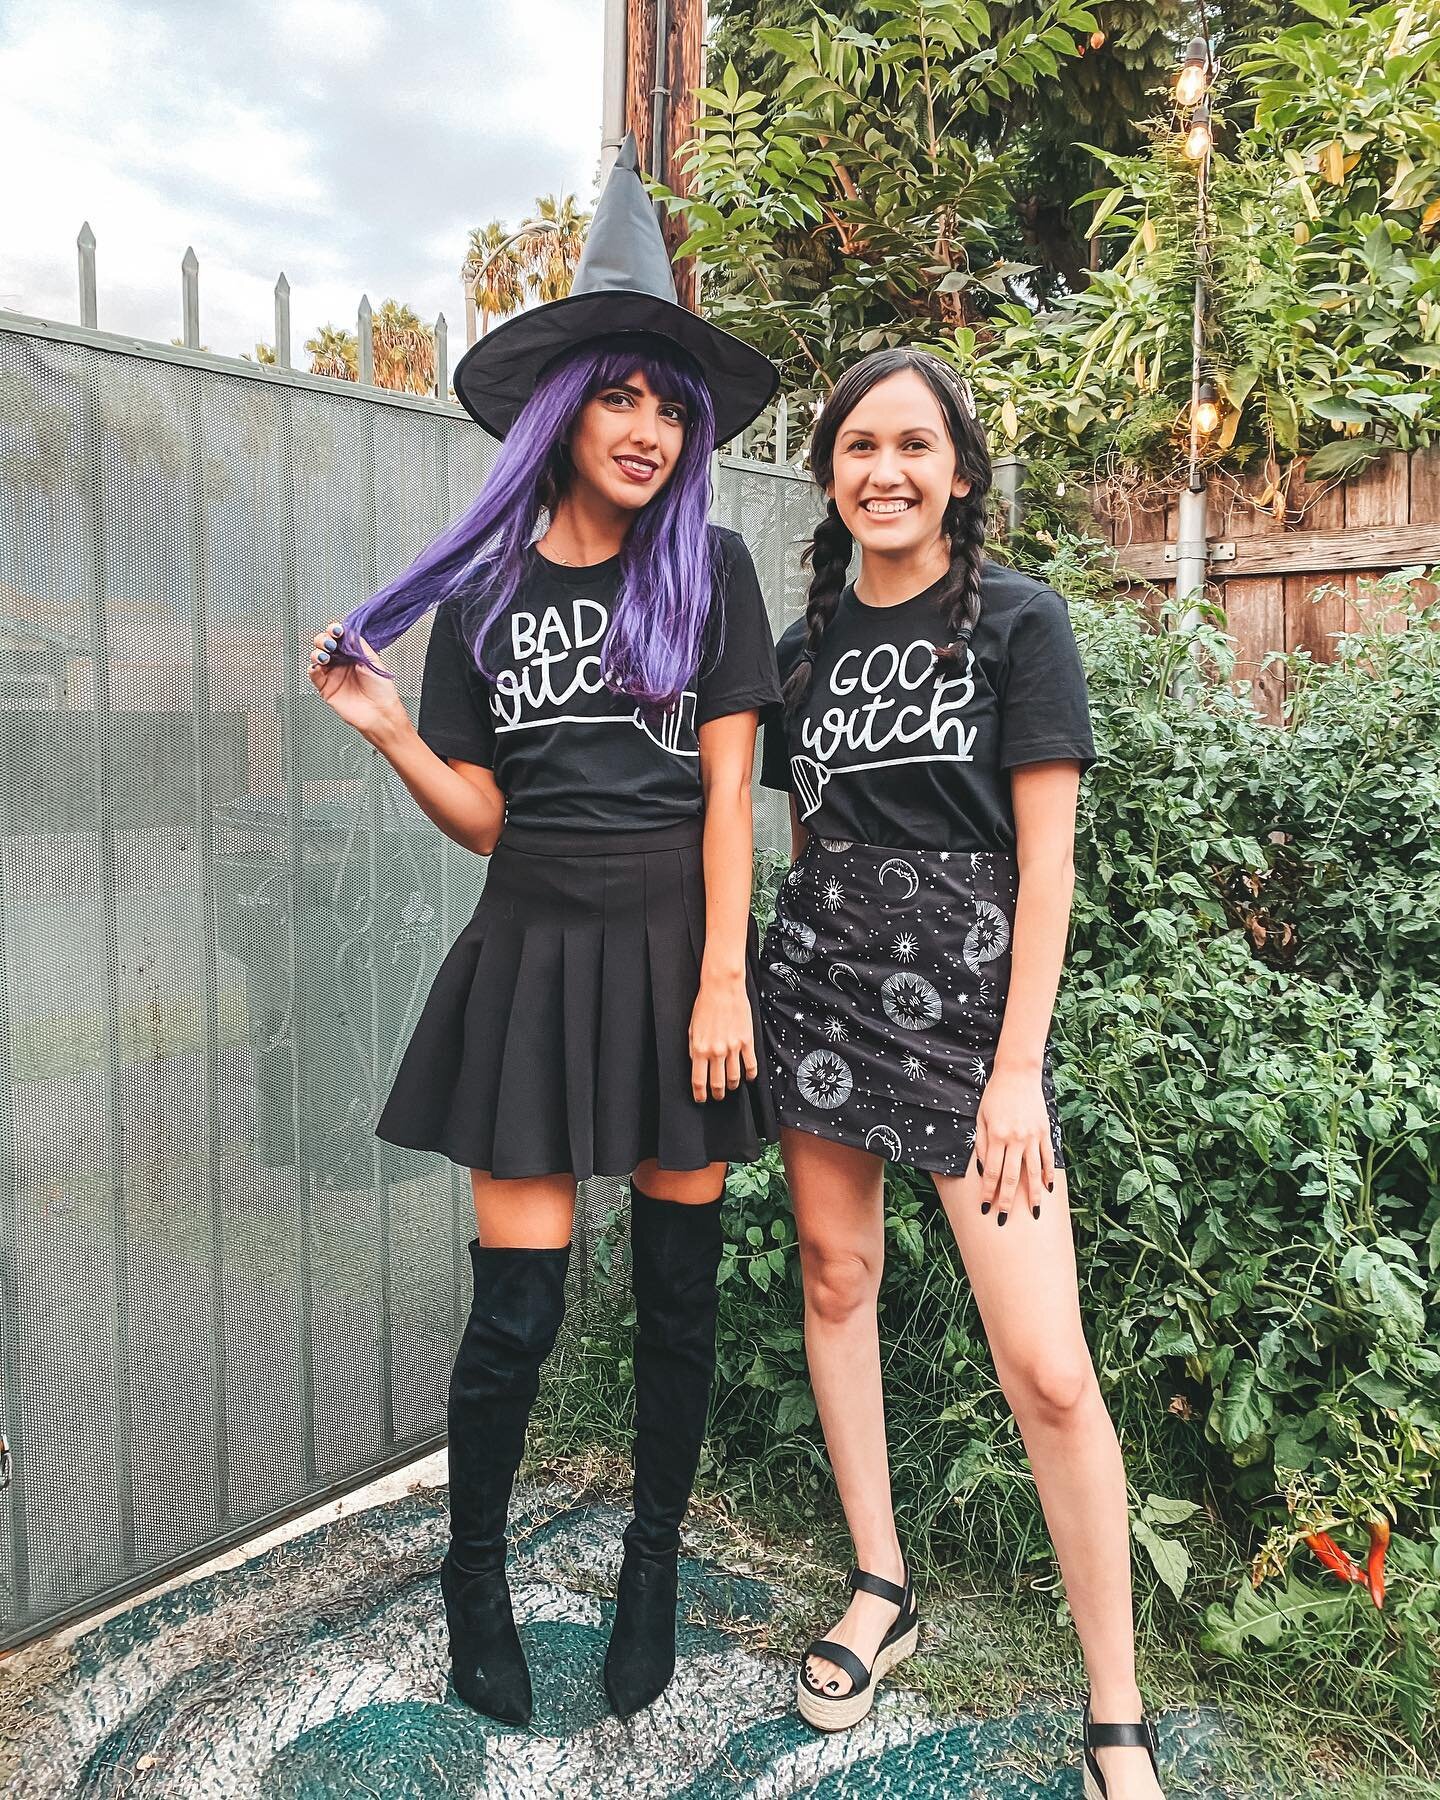 Big Witch Energy 🔮👯&zwj;♀️🧹💫
.
.
.
These shirts reminded me of that scene in House Bunny hahaha